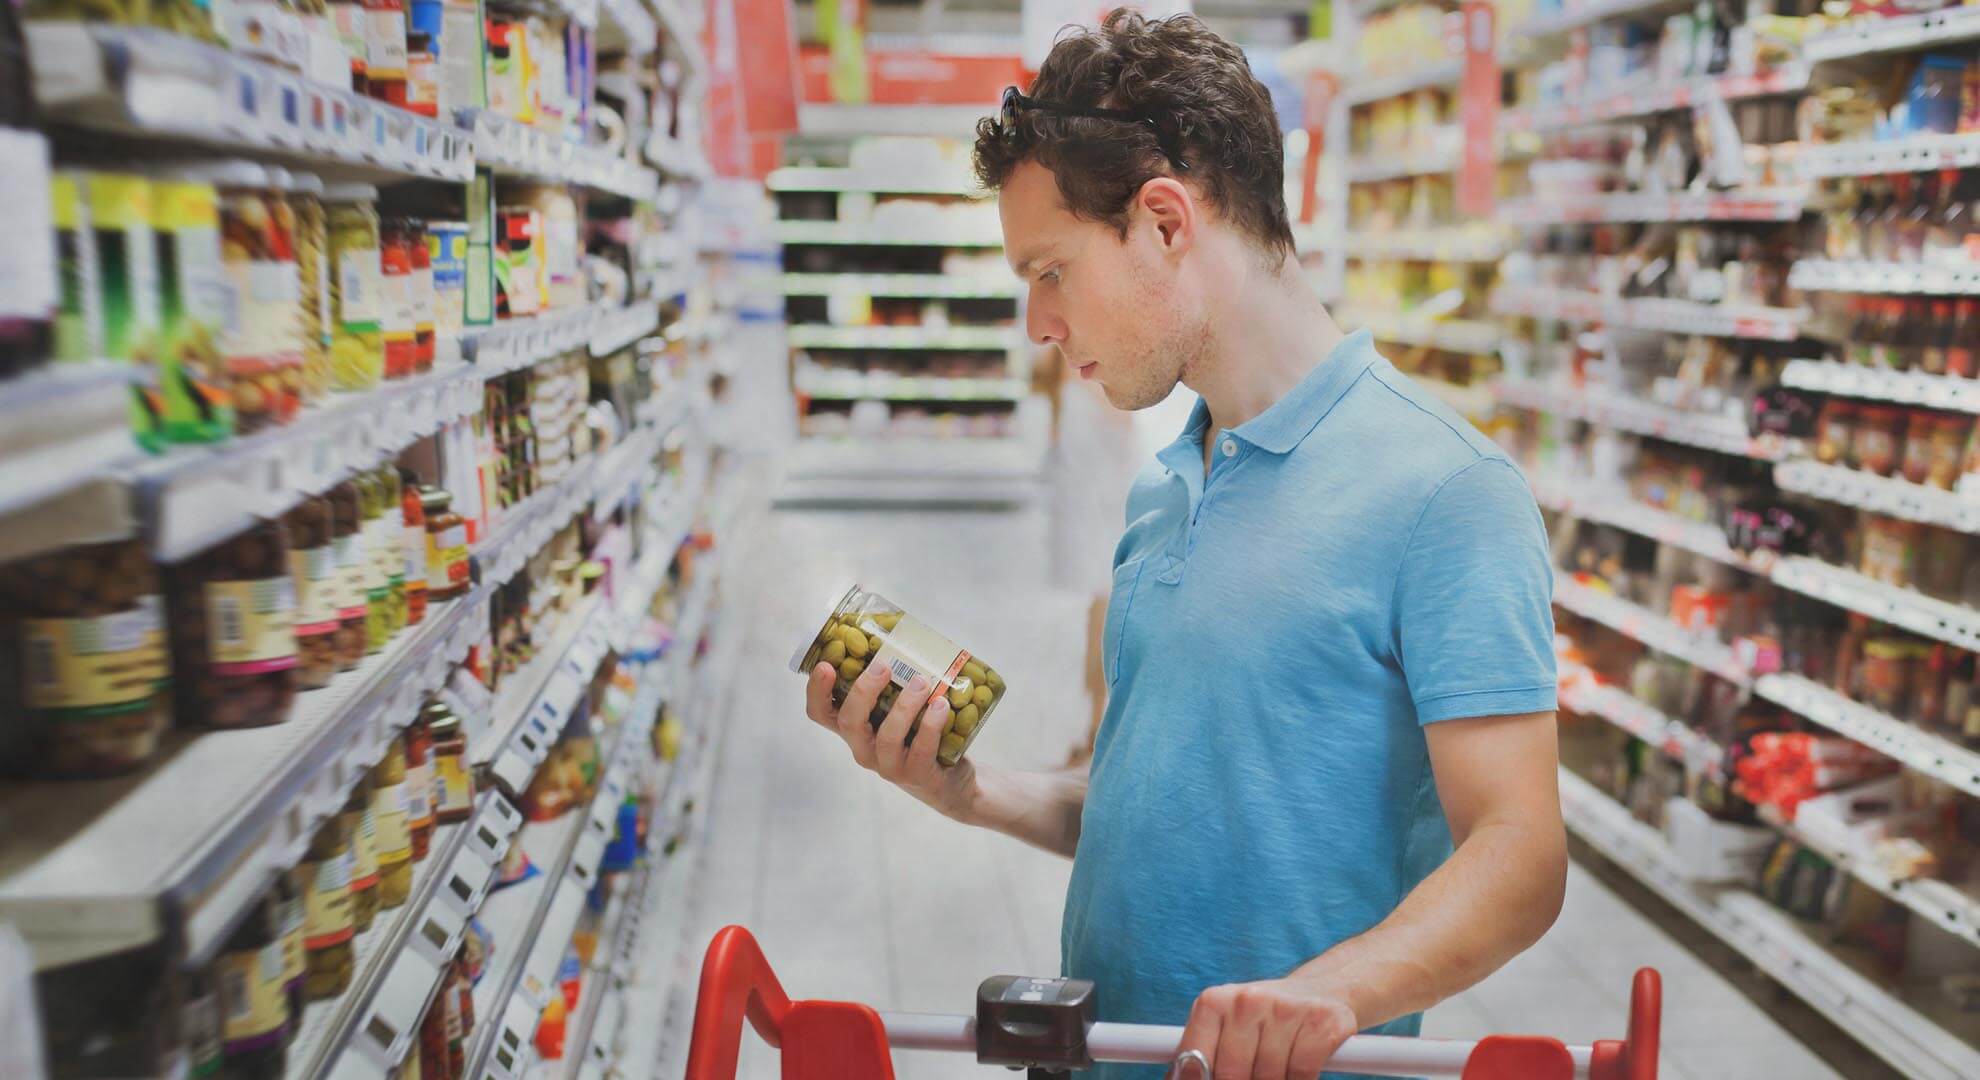 A person looking at food products in a supermarket aisle